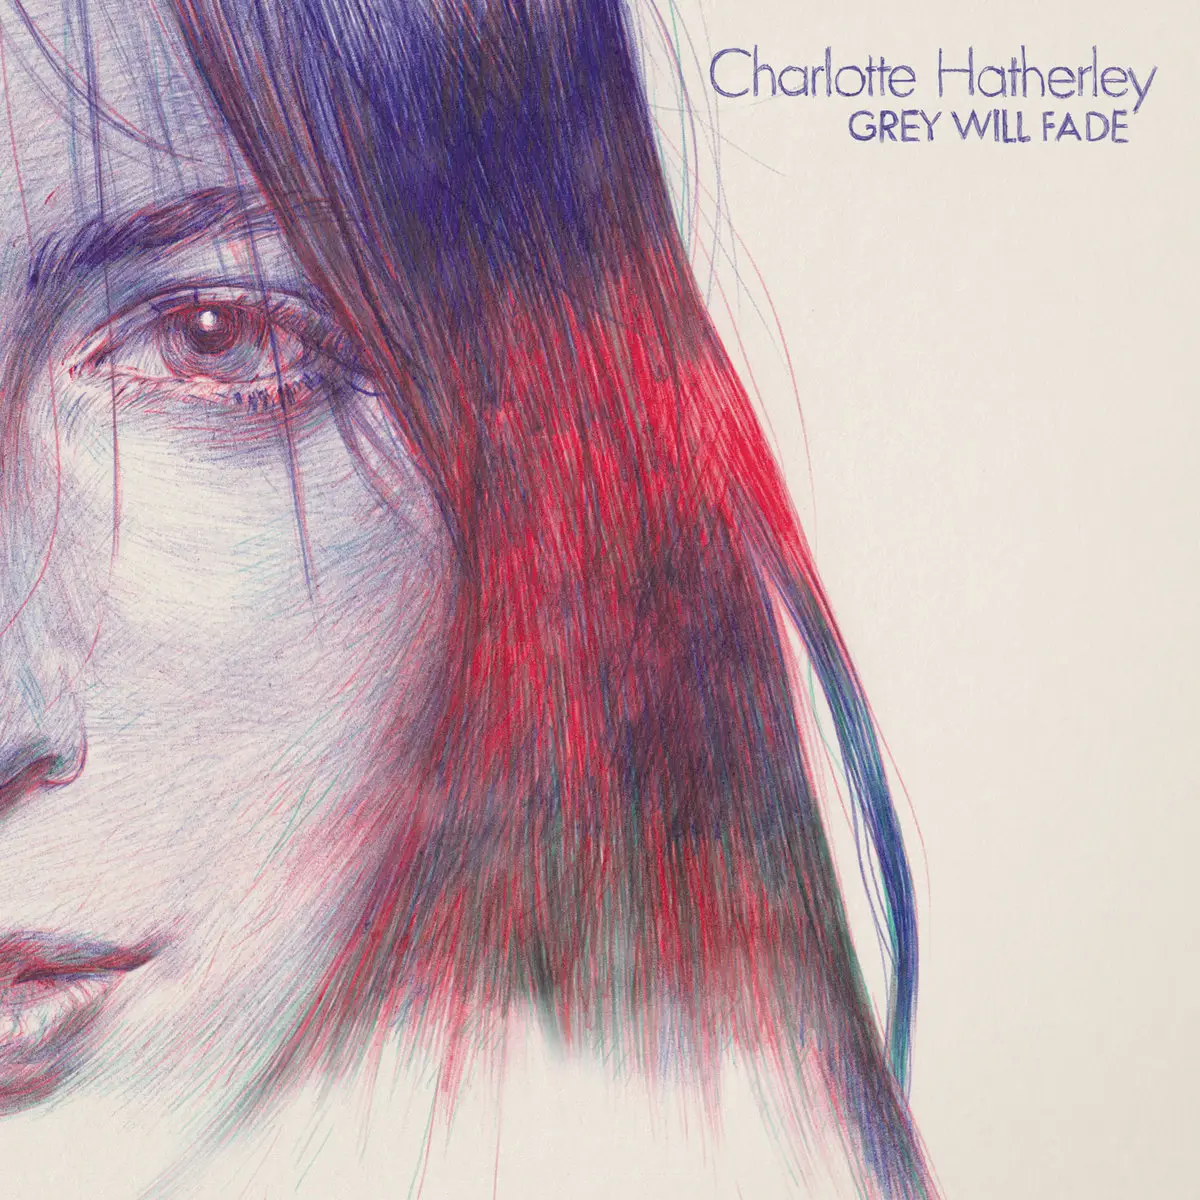 <strong>Charlotte Hatherley - Grey Will Fade</strong> (Vinyl LP - clear)